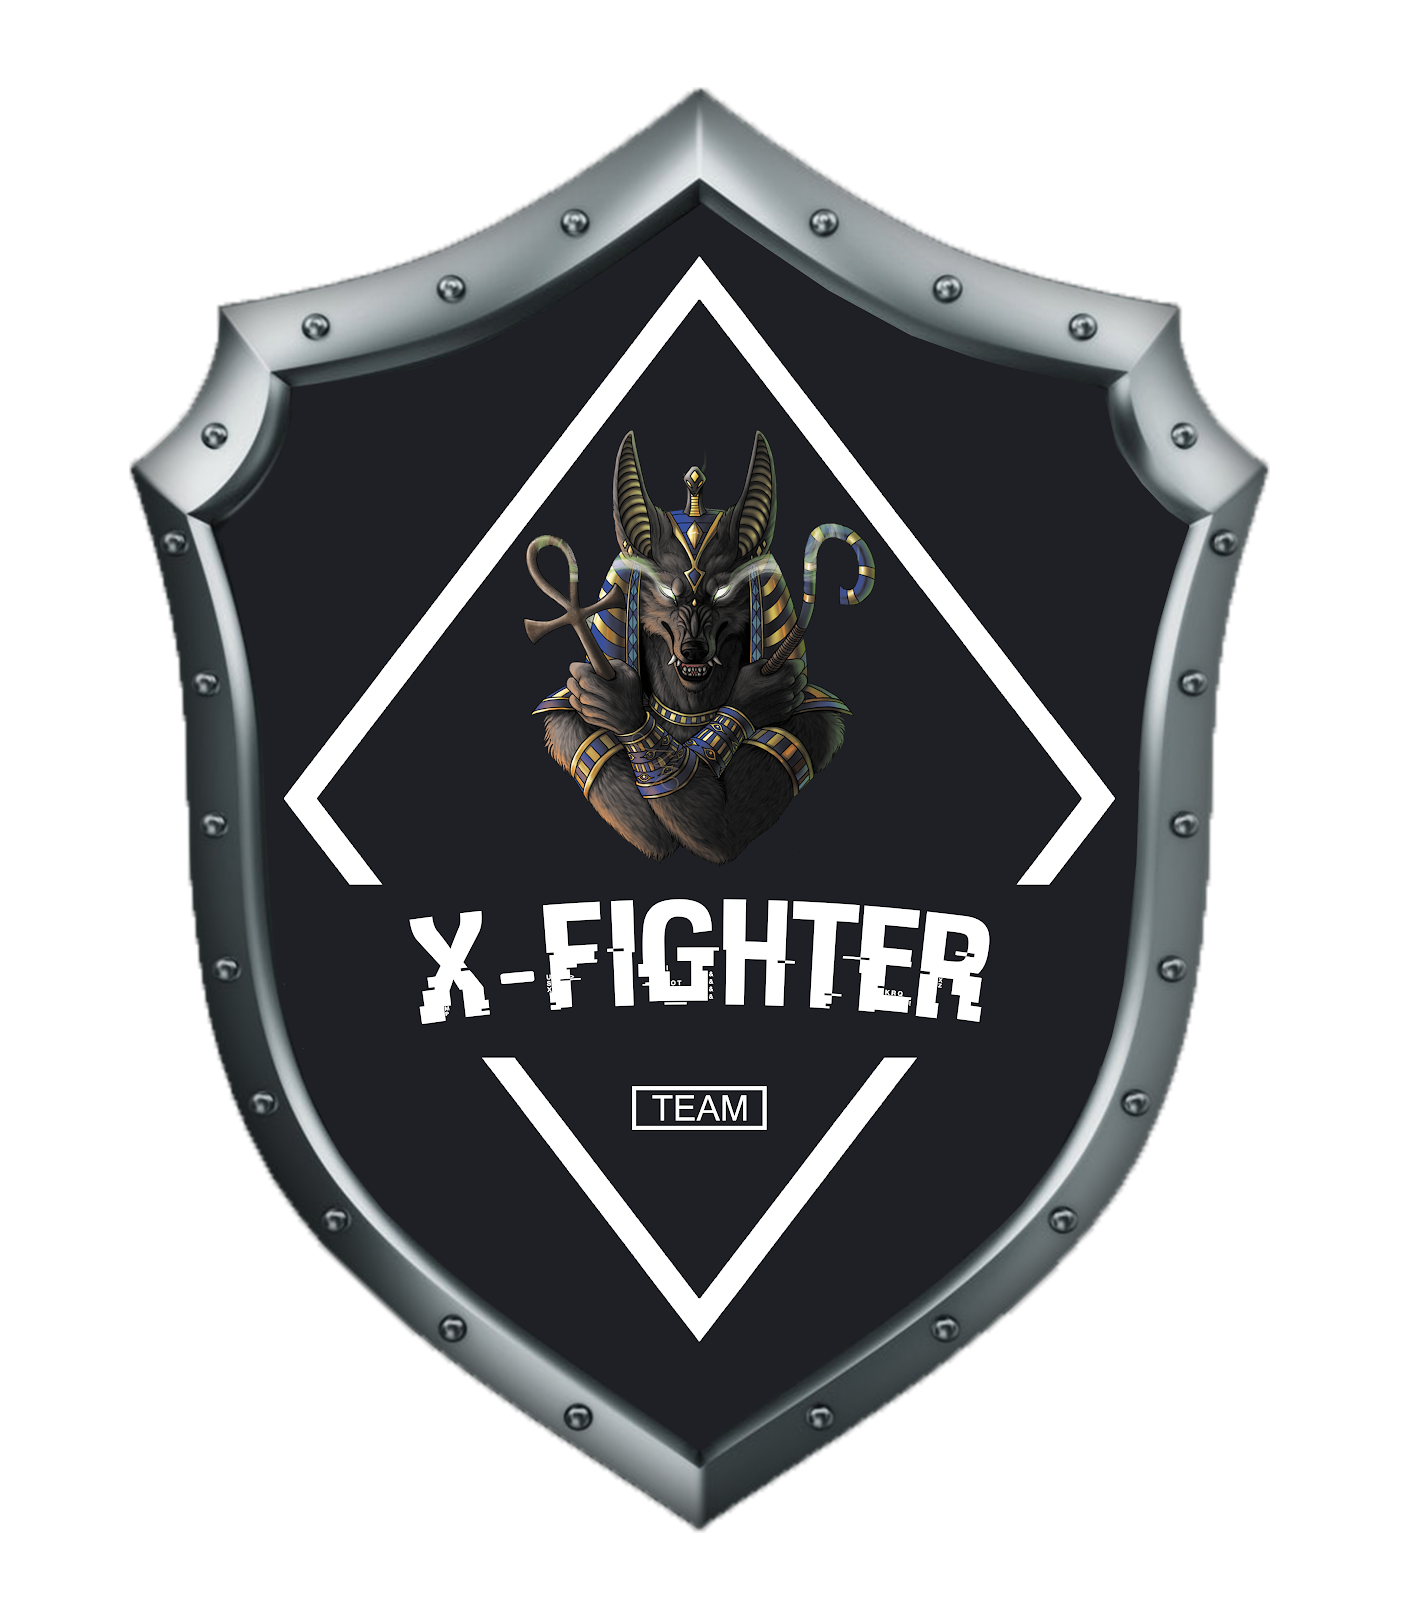 Team of X-Fighter